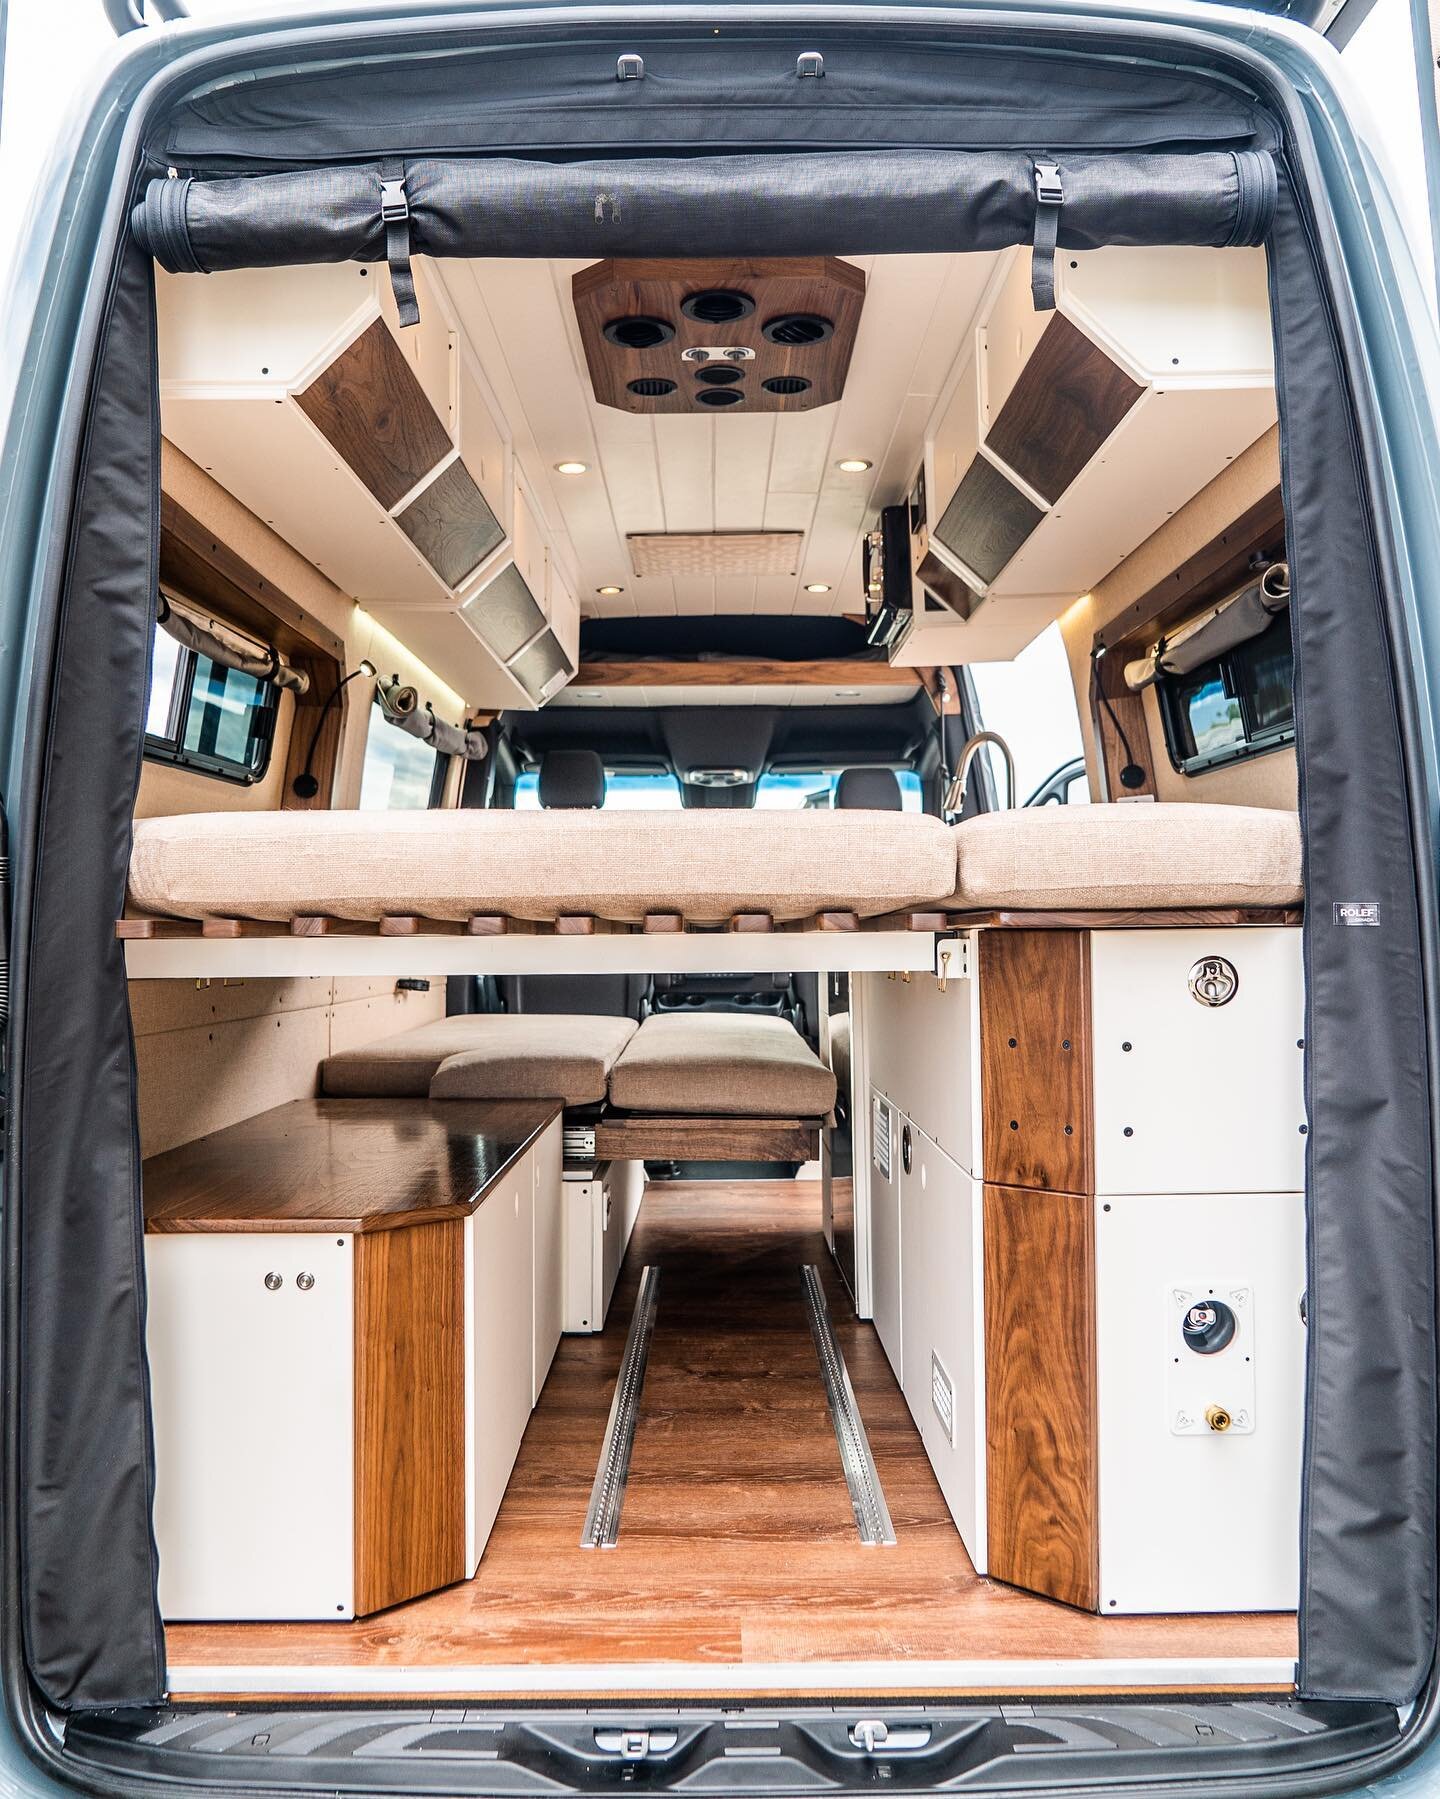 It&rsquo;s all in the details with this one. From walnut trim to the painted wood ceiling every detail of this van came together perfect. Pair that with robust living amenities, rugged external components, and two comfortable beds, and you&rsquo;ve g